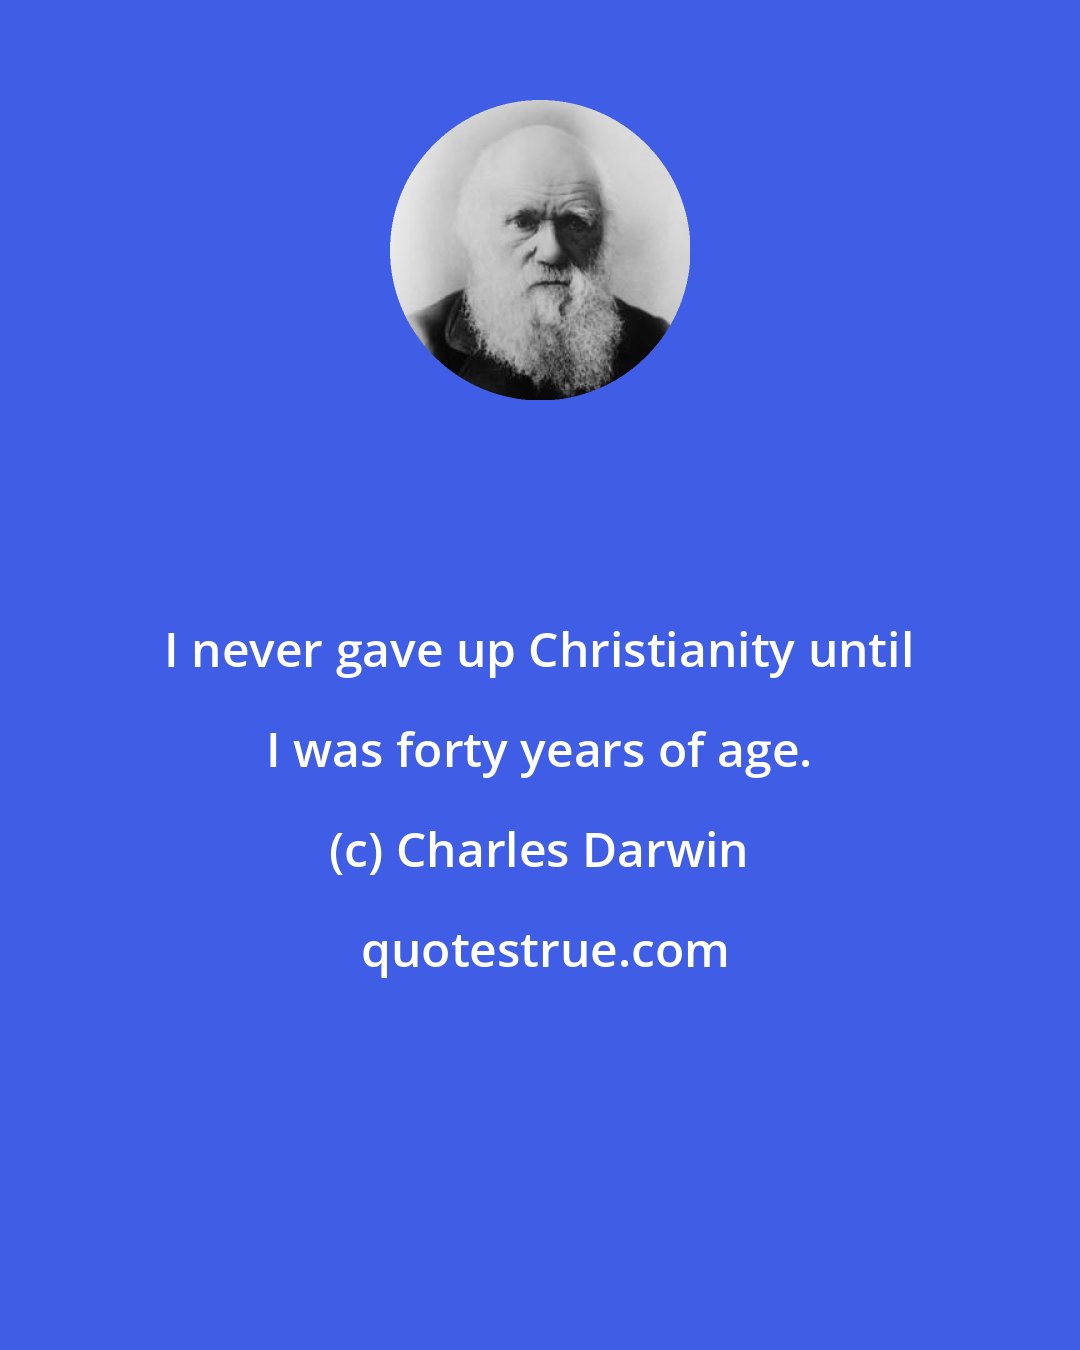 Charles Darwin: I never gave up Christianity until I was forty years of age.